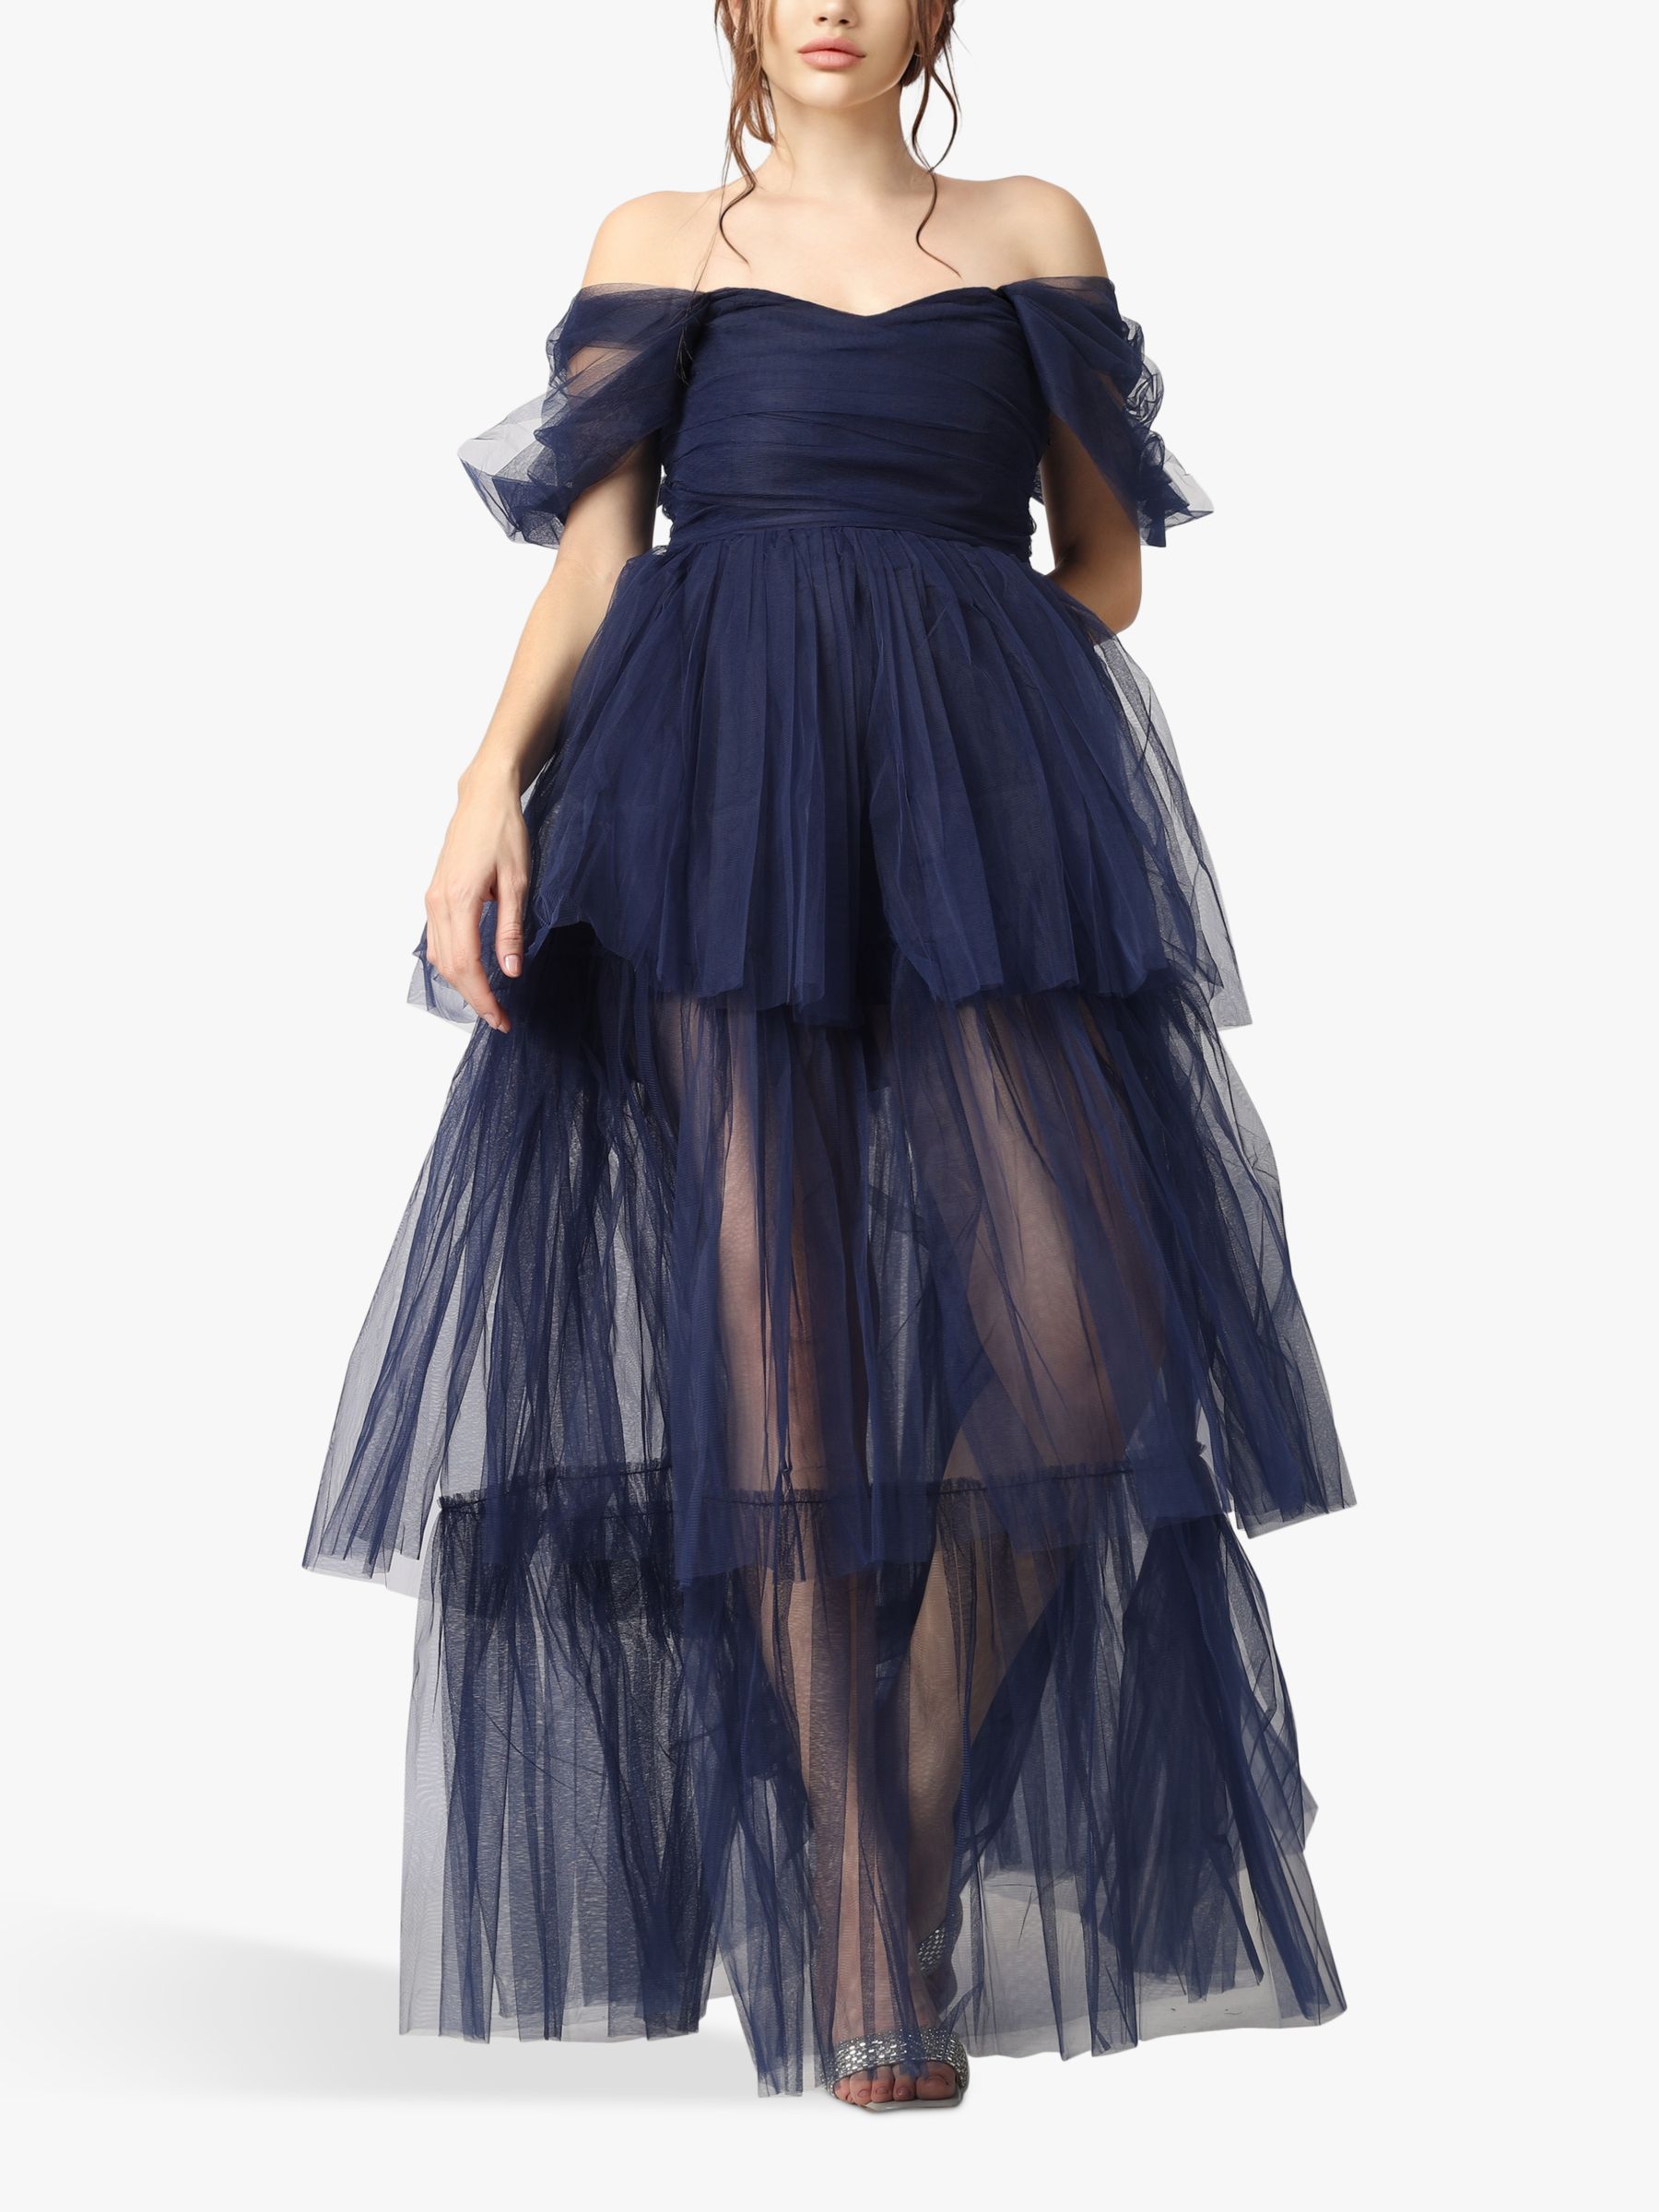 Buy Lace & Beads Sydney Tulle Tiered Maxi Dress, Galactic Cobalt Online at johnlewis.com